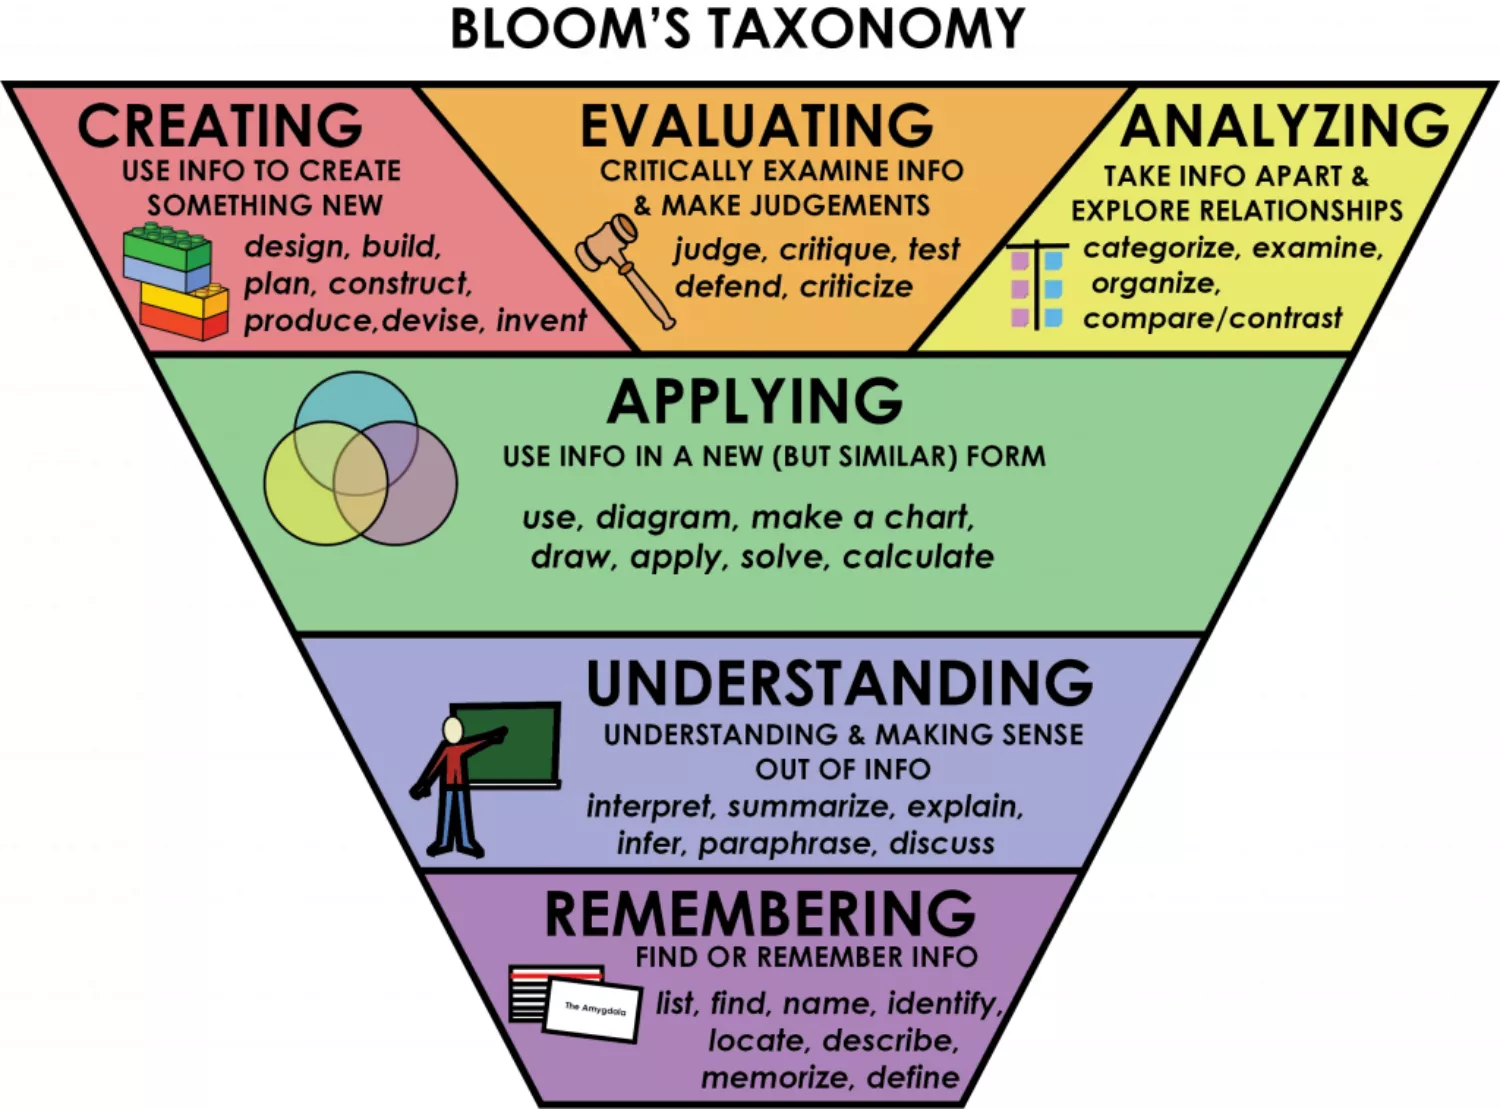 Blooms Taxonomy triangle with the subjects: creating, evaluating, analyzing, applying, understanding, and remembering